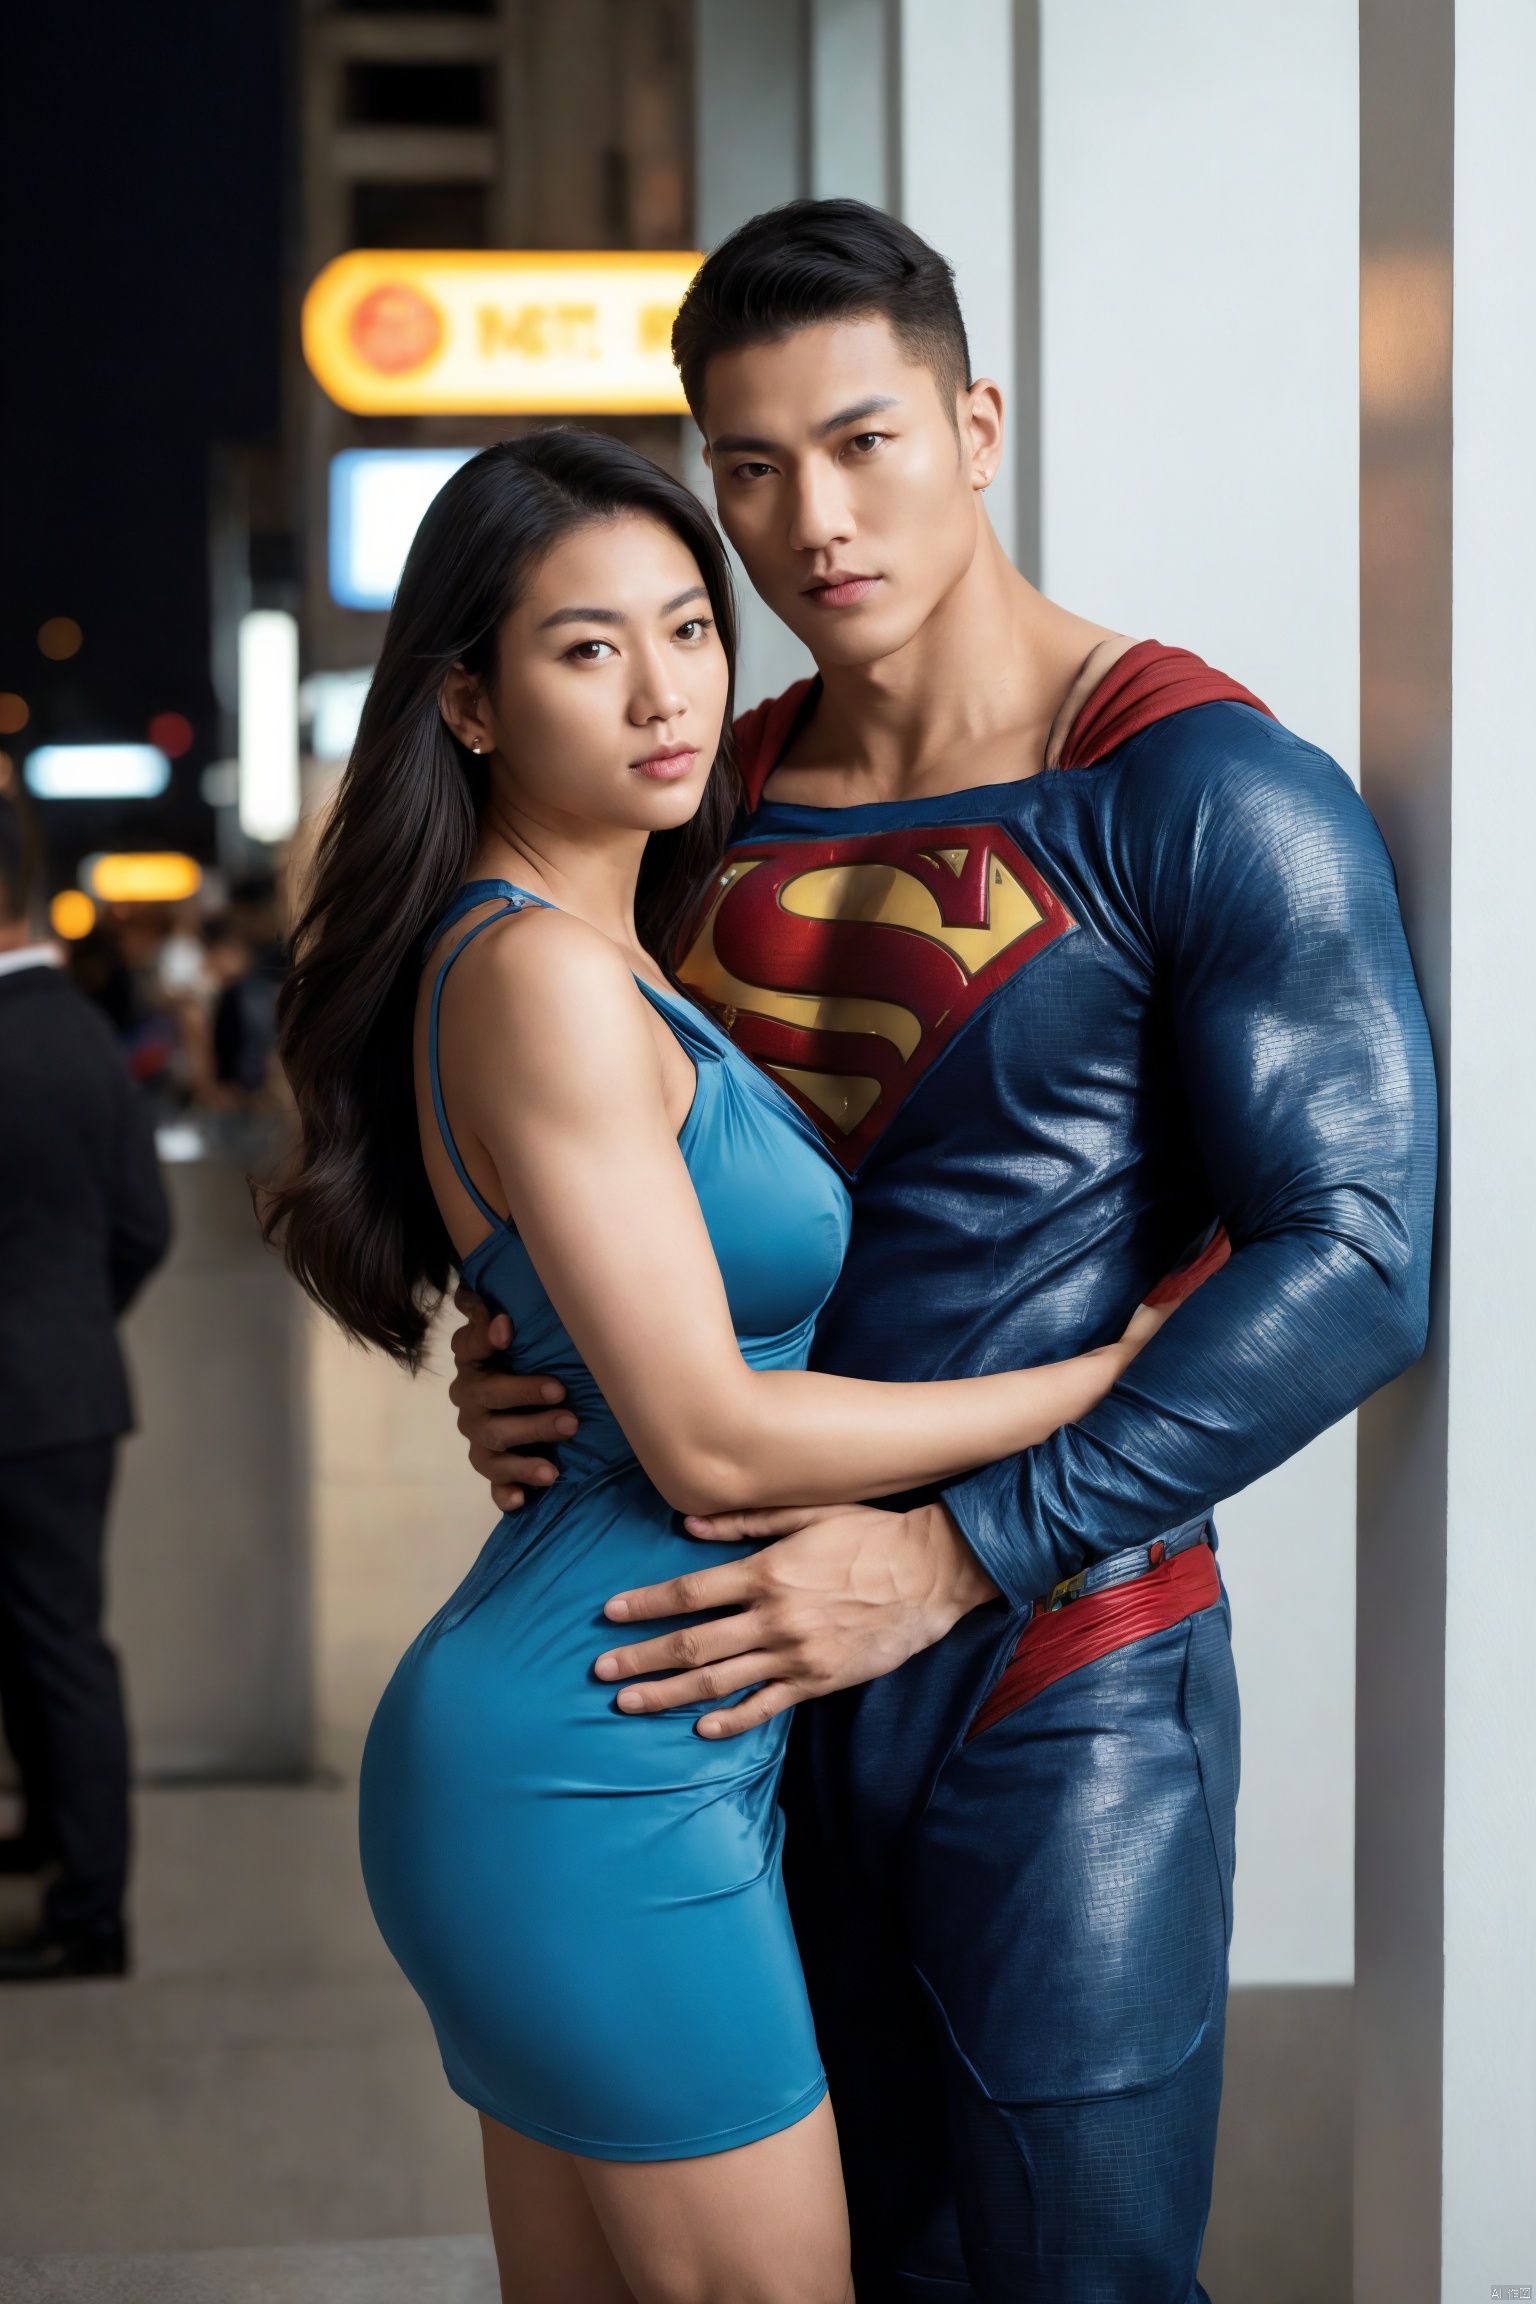  1superman,(to be cuddled by a sexy woman who wearing dress,her hand on superman's chest),Asian,solo,male focus,exquisite facial features,handsome,charming,muscular,outdoors,city,dark,(masterpiece,hyperrealistic,best quality,highly detailed,highres,colorful,highres,cyberpunk),jzns,brxu, pjcouple, plns,plsw